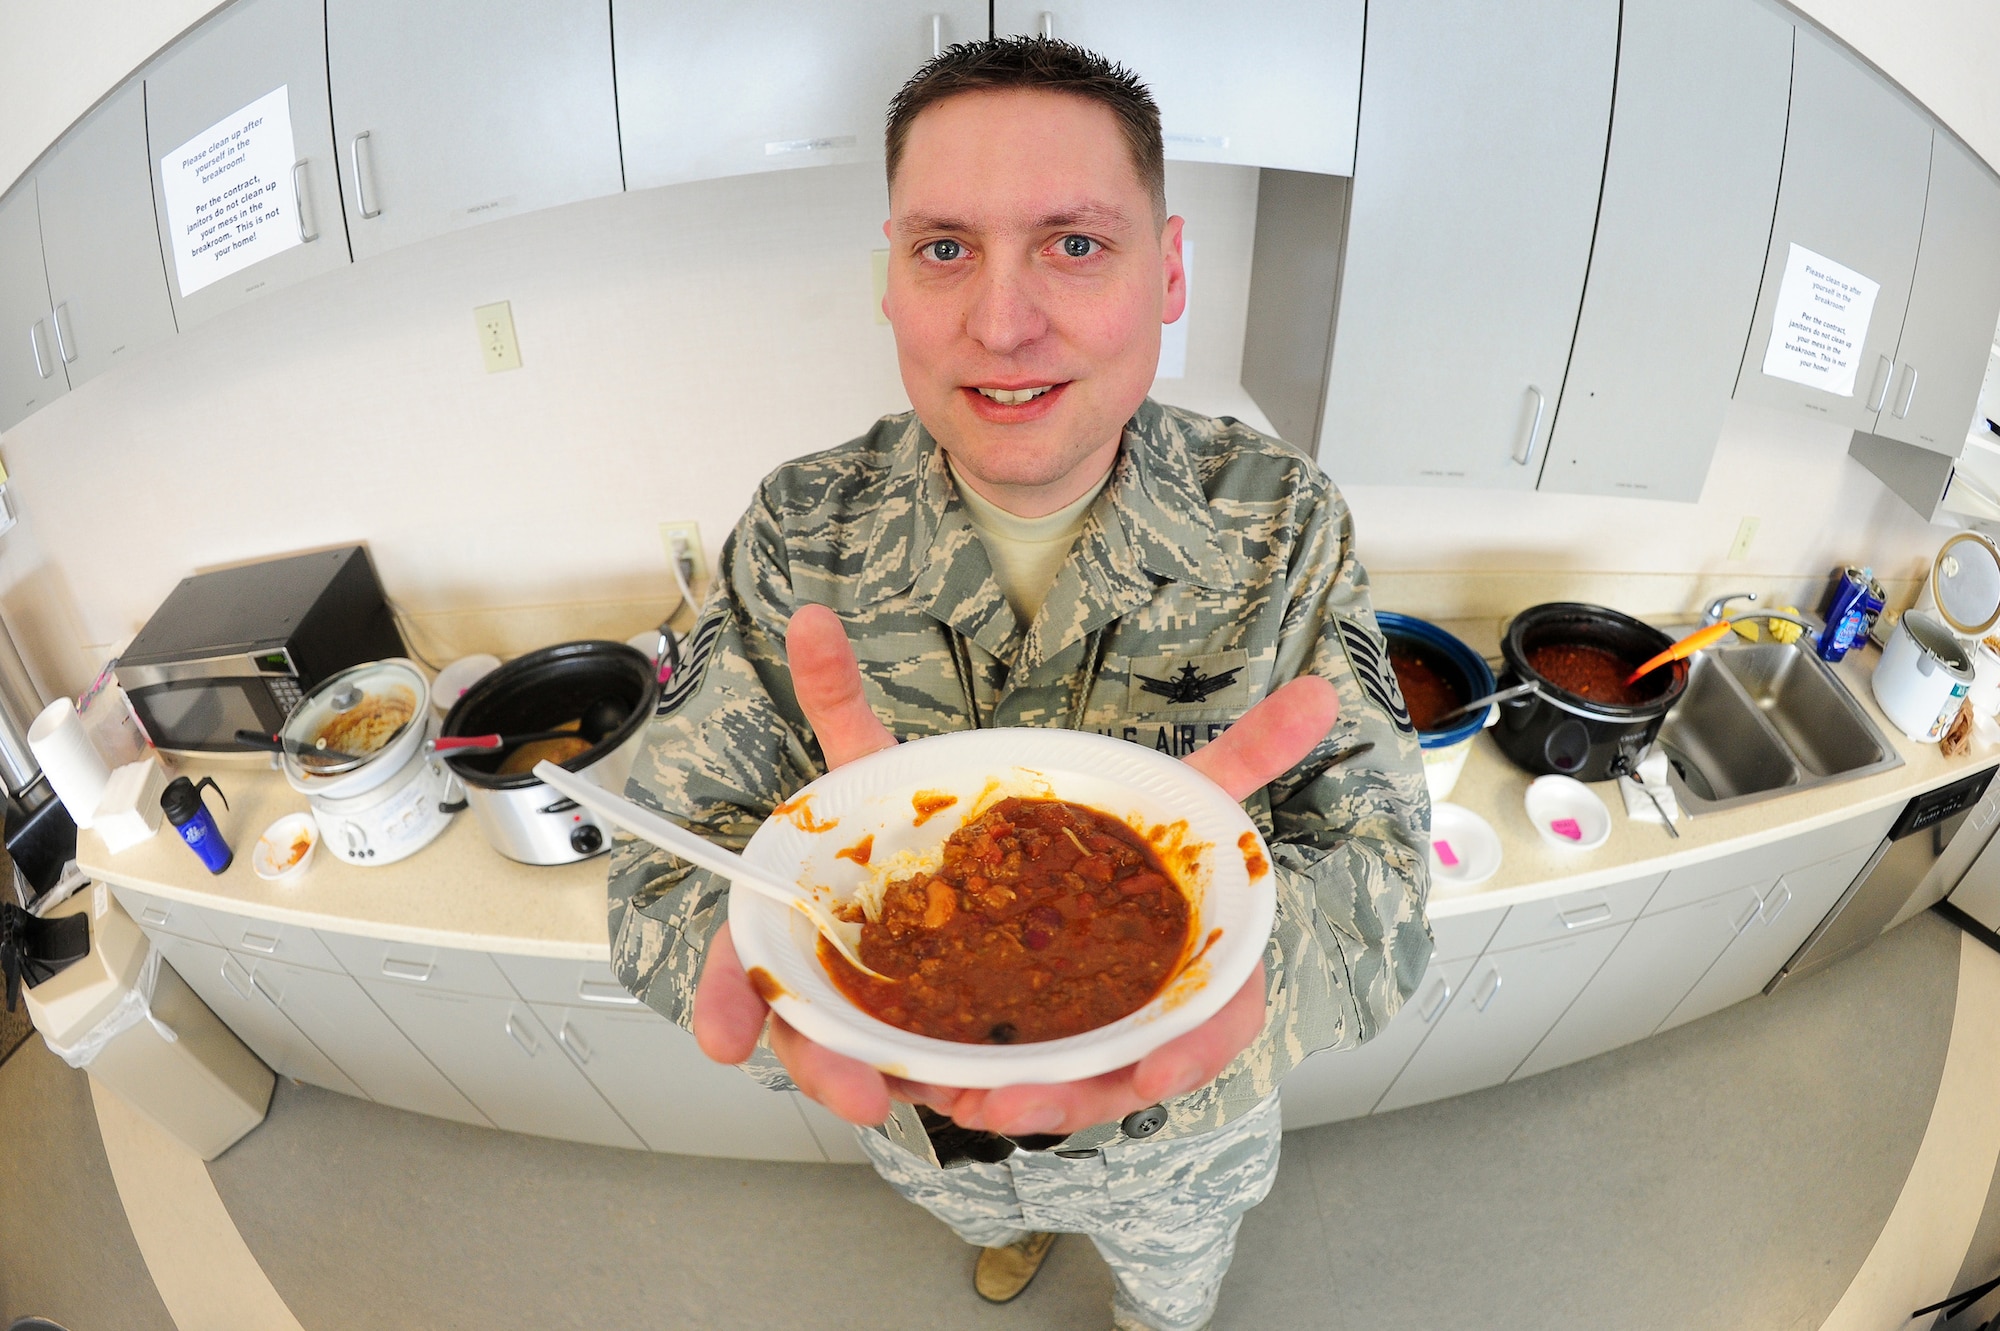 Air Force Reserve Tech. Sgt. Richard Schafer shows off a steaming bowl of chili Feb. 1, 2014, at Schriever Air Force Base, Colo. It was one of 12 different chilis and soups that he sampled during the 310th Space Wing Top-3 chili and soup cook-off. The cook-off was held to raise money for the 310th SW annual awards banquet in March. The Top-3 is an association of senior non-commissioned officers that promote military professionalism, development and quality of life for all enlisted personnel. (U.S. Air Force photo/Tech. Sgt. Nicholas B. Ontiveros)